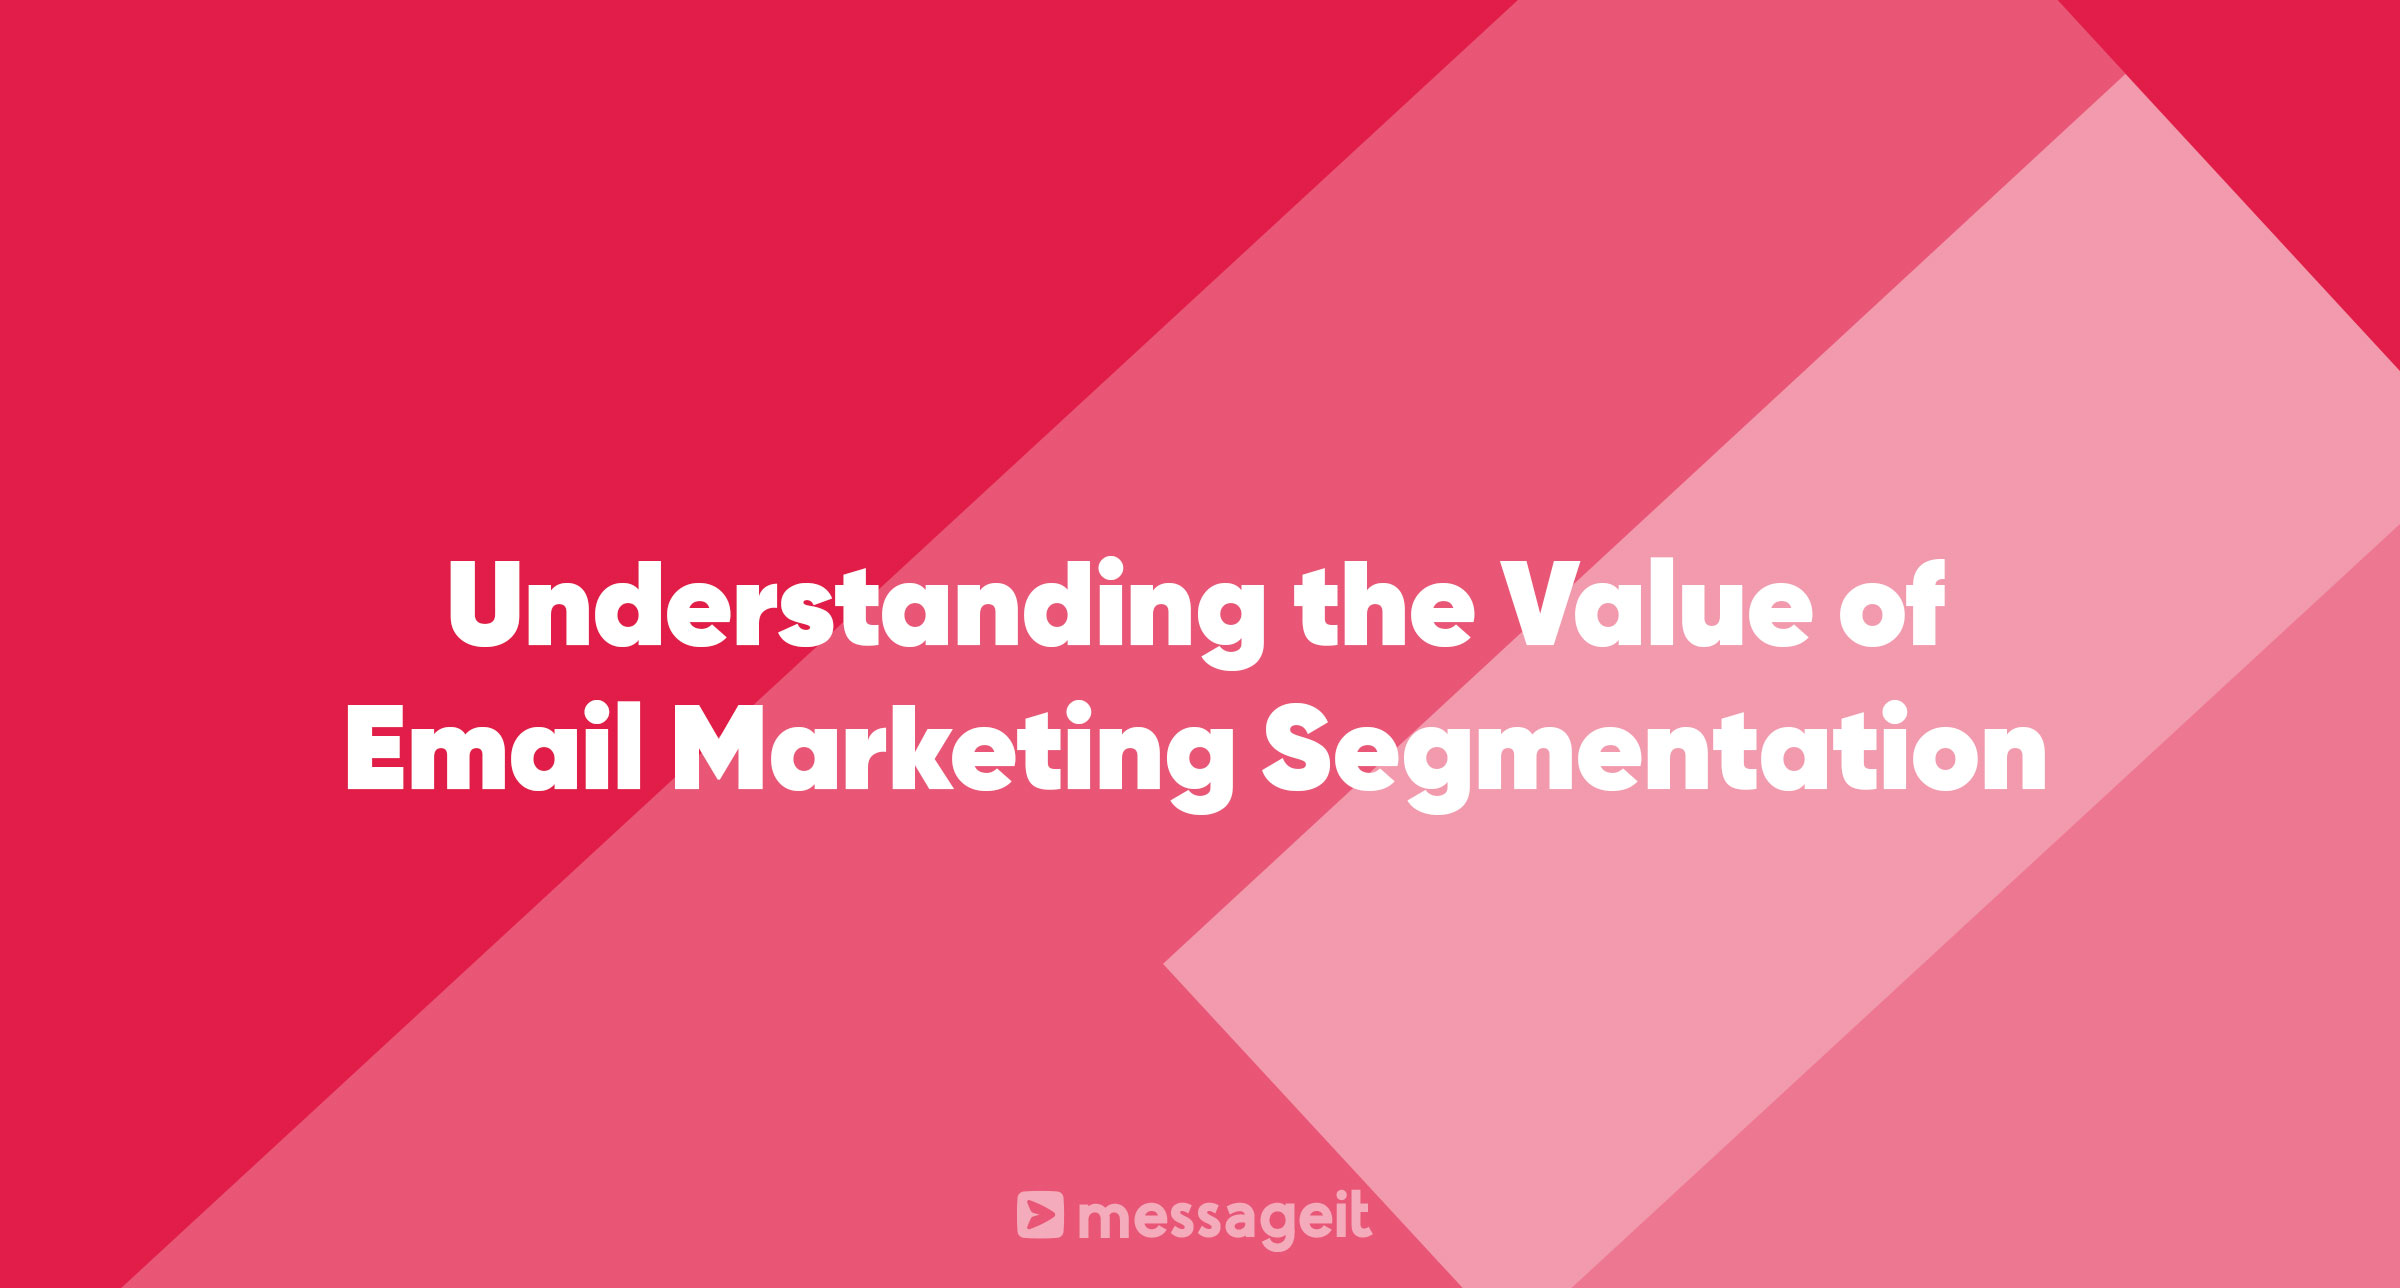 Article | Understanding the Value of Email Marketing Segmentation